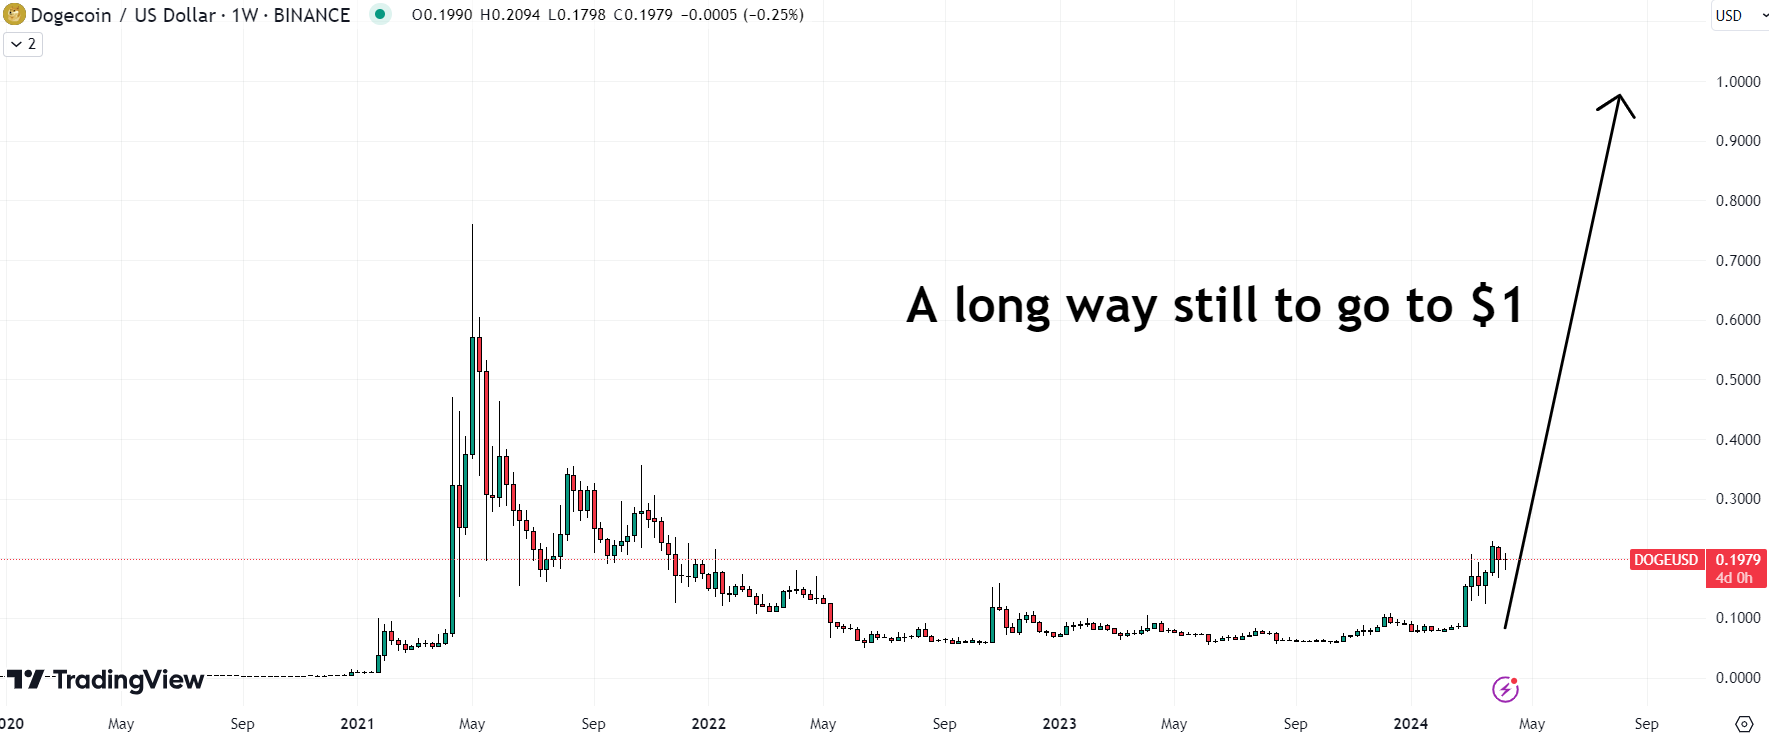 The Dogecoin price still has a very long way to go before it hits $1. Source: TradingView